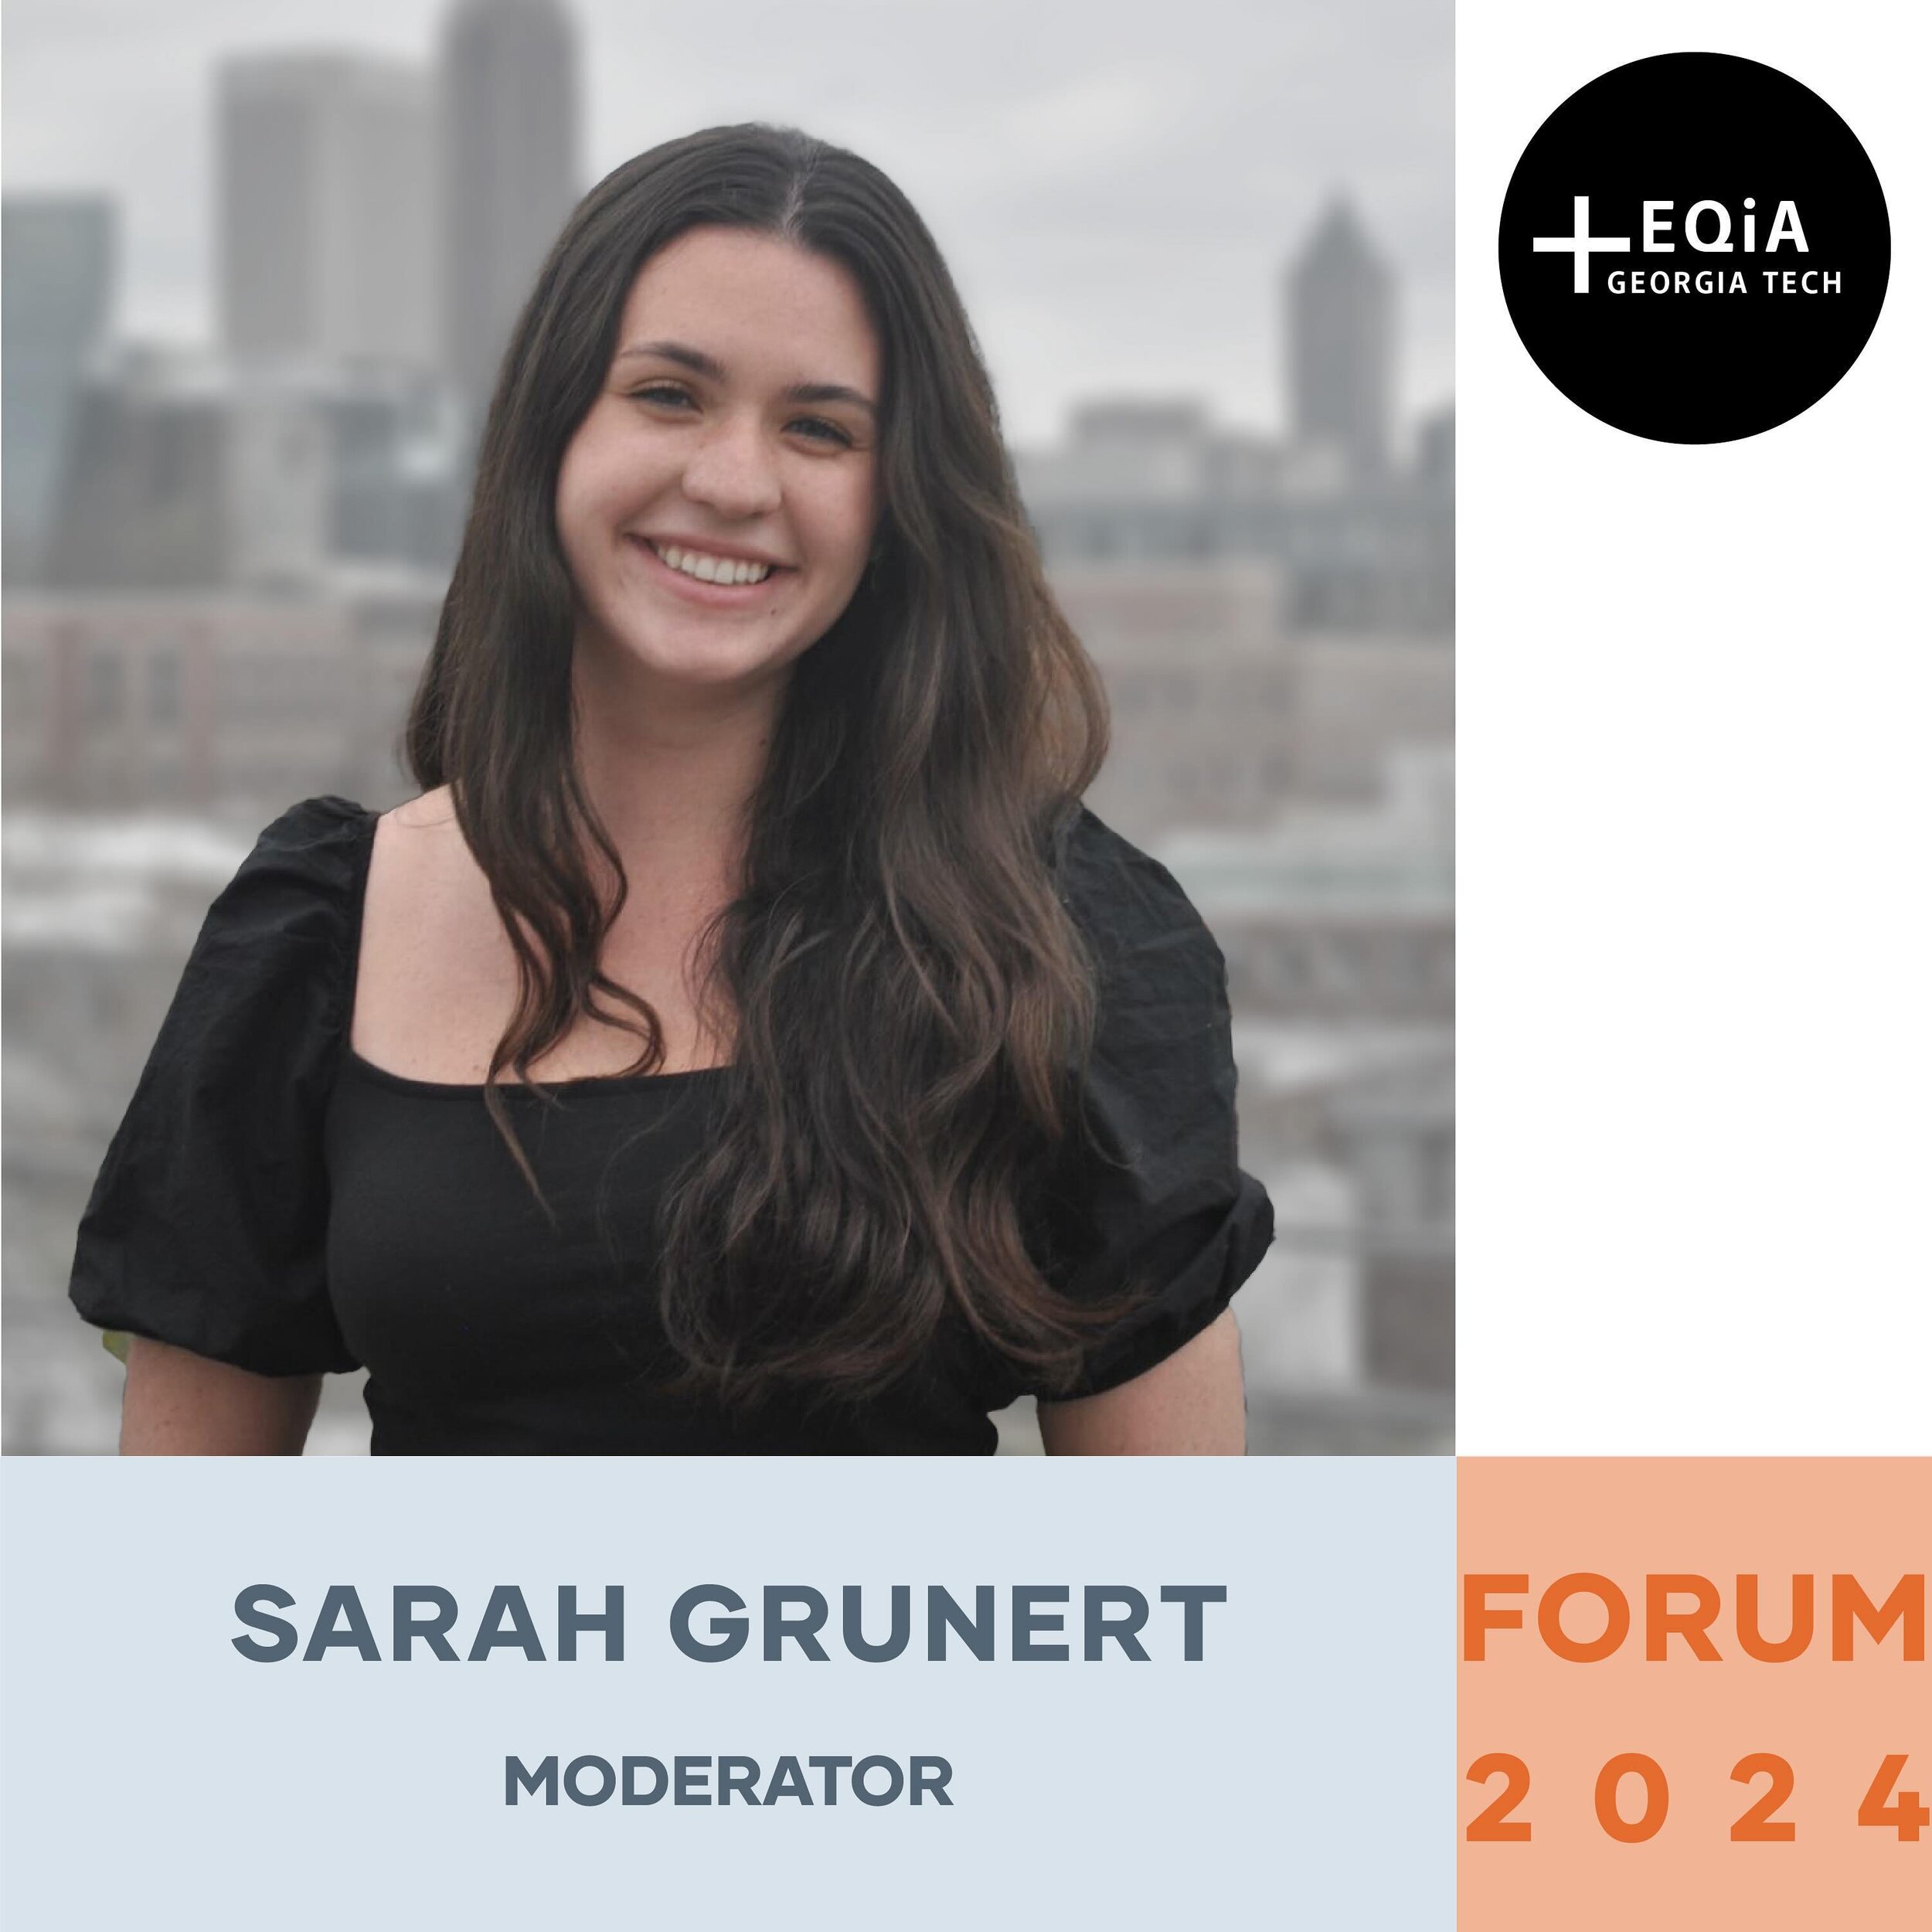 ⭐️ FORUM MODERATOR ⭐️
We&rsquo;re excited to share our Forum Moderator, Sarah Grunert! 
Sarah completed her B.S. in Architecture at Georgia Tech and is about to graduate from the MArch program! In her 6 years at Georgia Tech, she has focused on learn